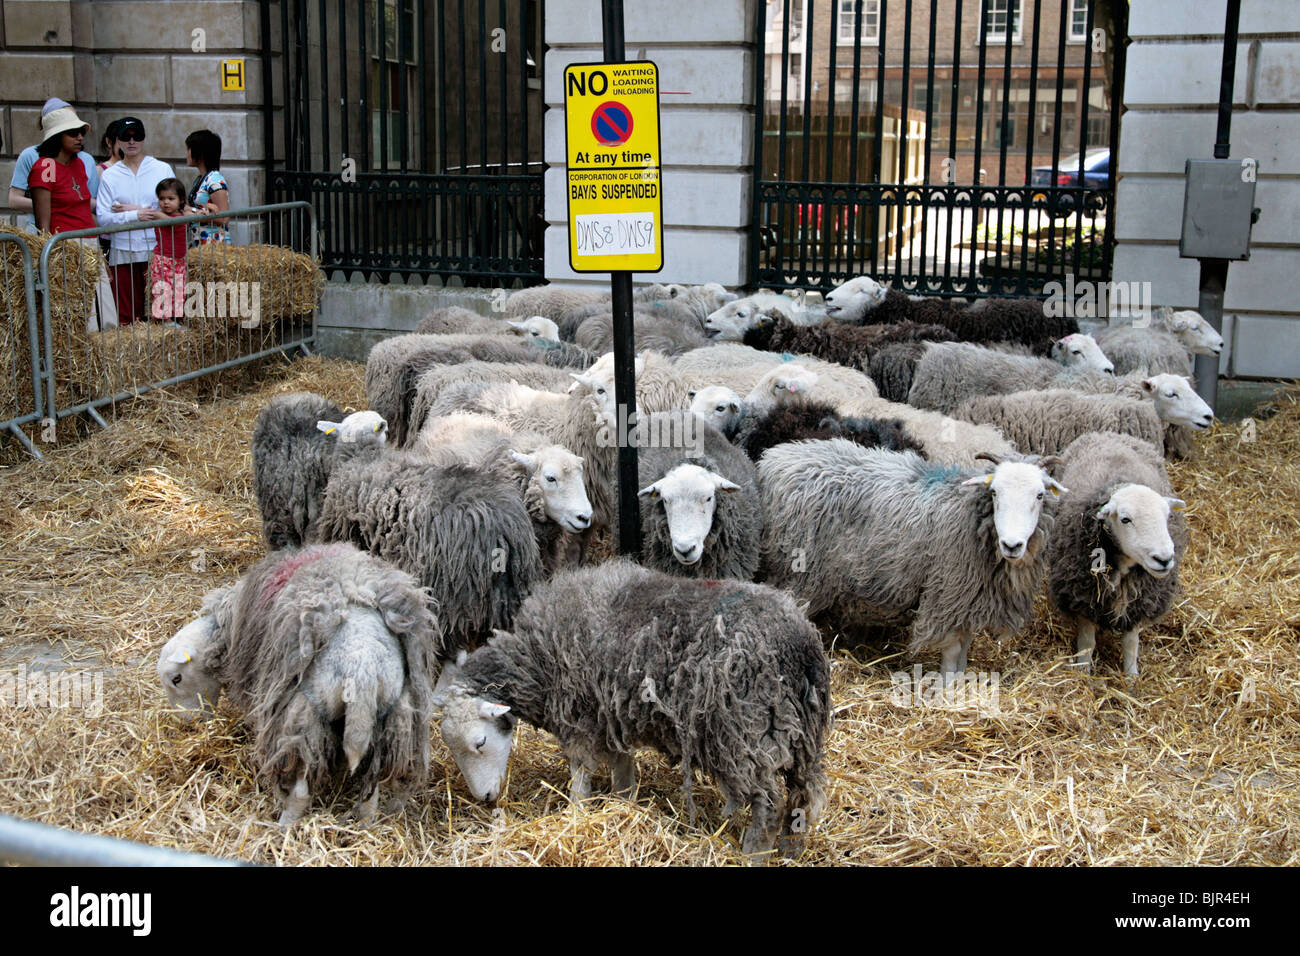 sheep in a pen in london Stock Photo